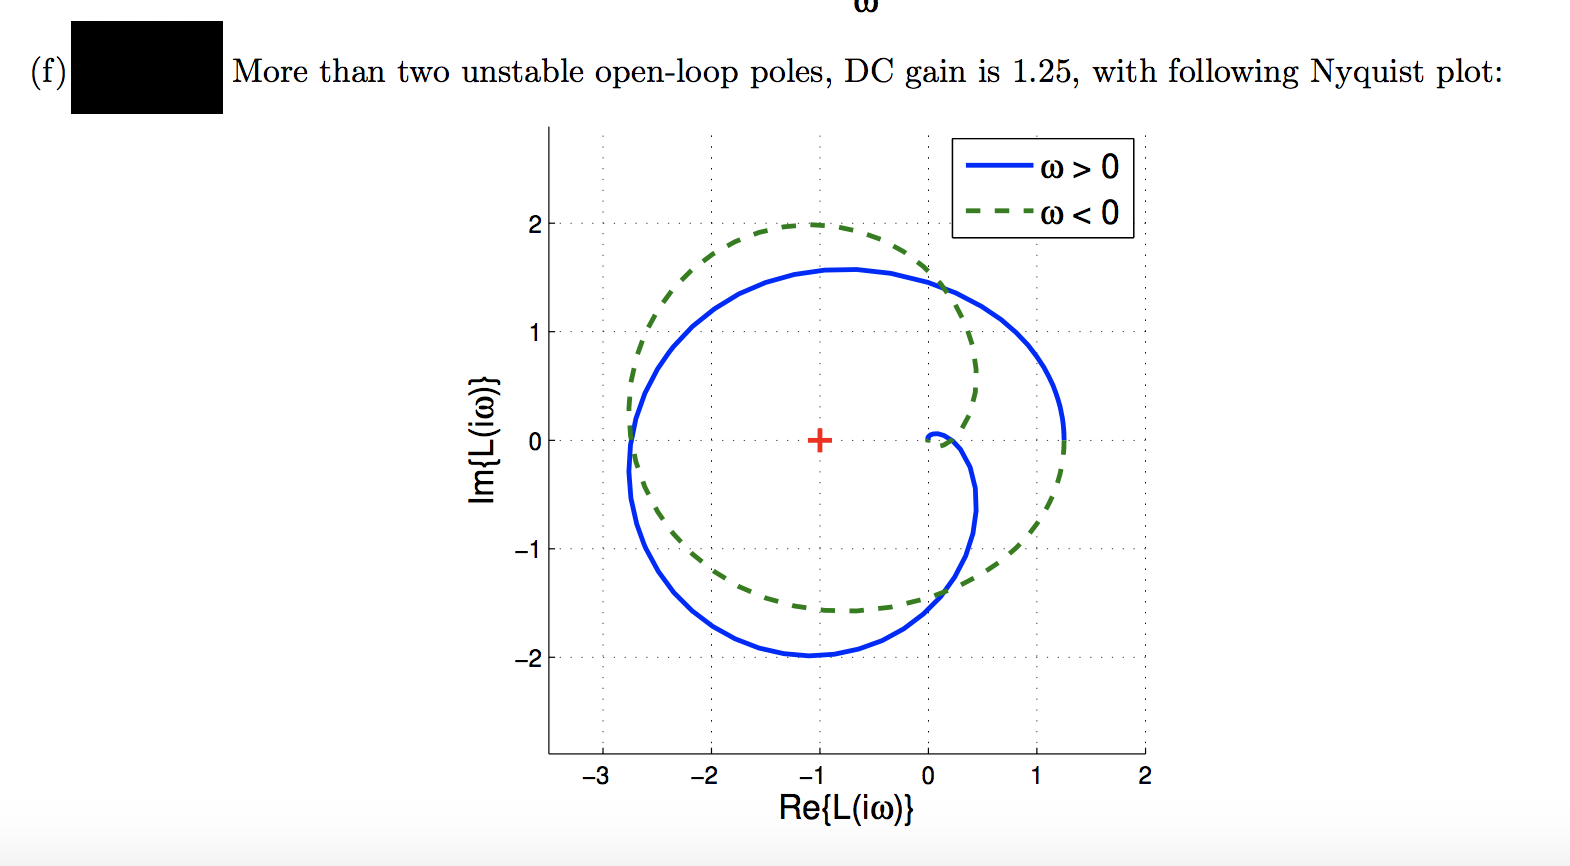 (f)
More than two unstable open-loop poles, DC gain is 1.25, with following Nyquist plot:
2
-1
-2
-3
-2
-1
0
1
2
Re{L(io)
{(o)u
